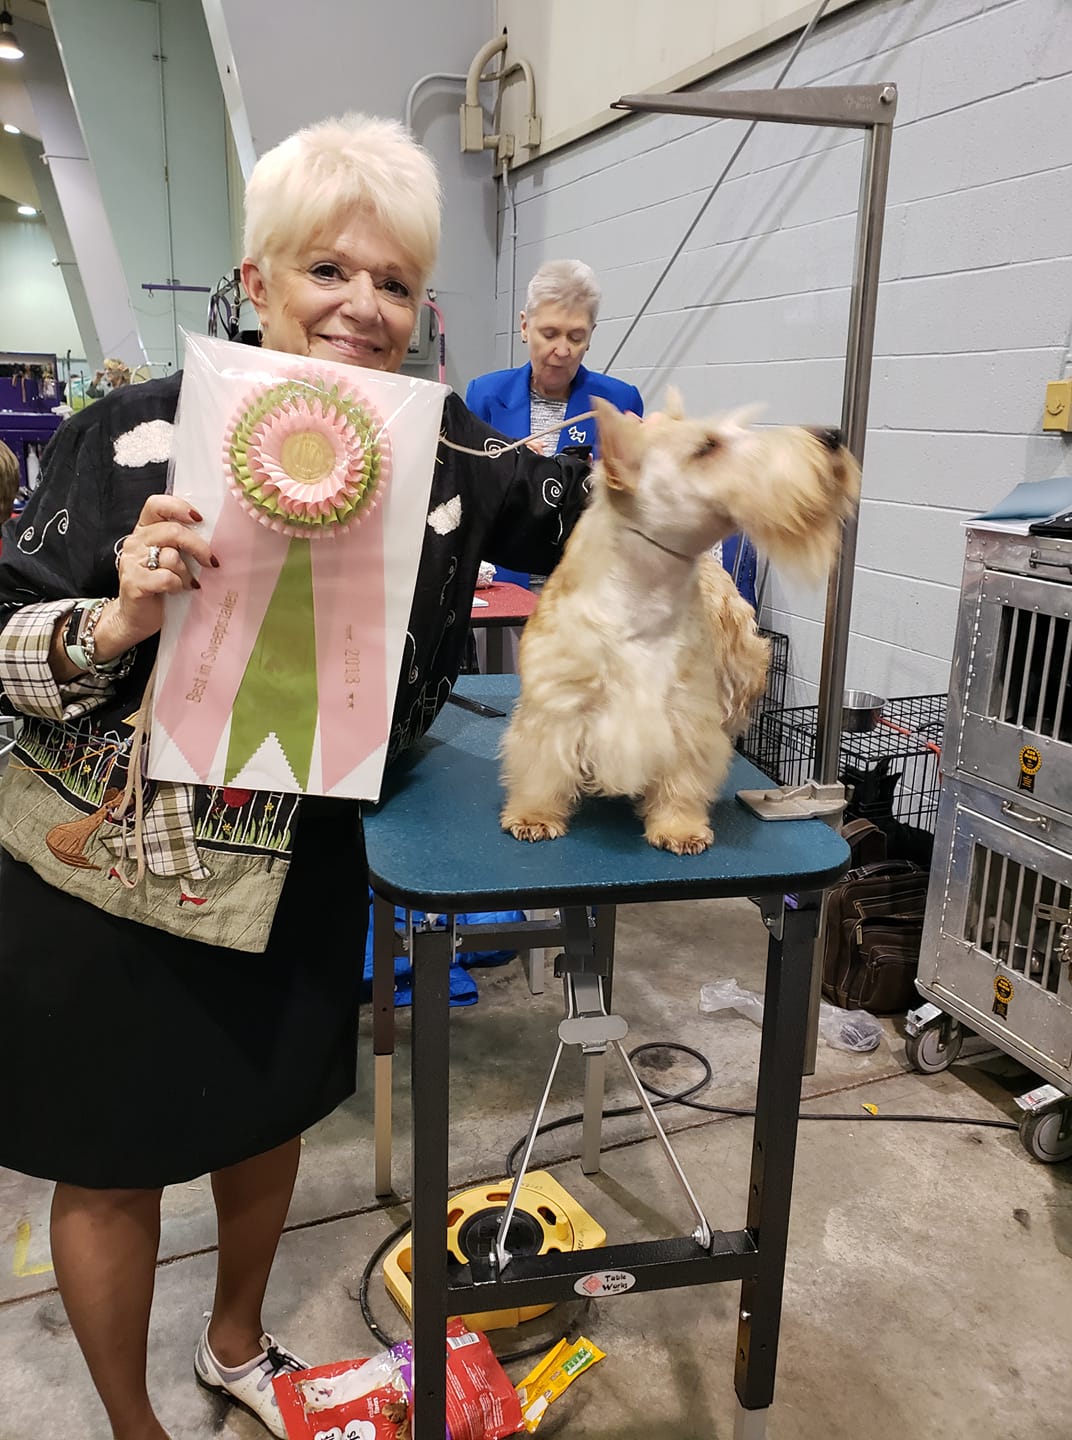 Nancy Hurren with Maizee at STCWV Specialty 2018 45937817_10213030774629409_5210457188803280896_o.jpg